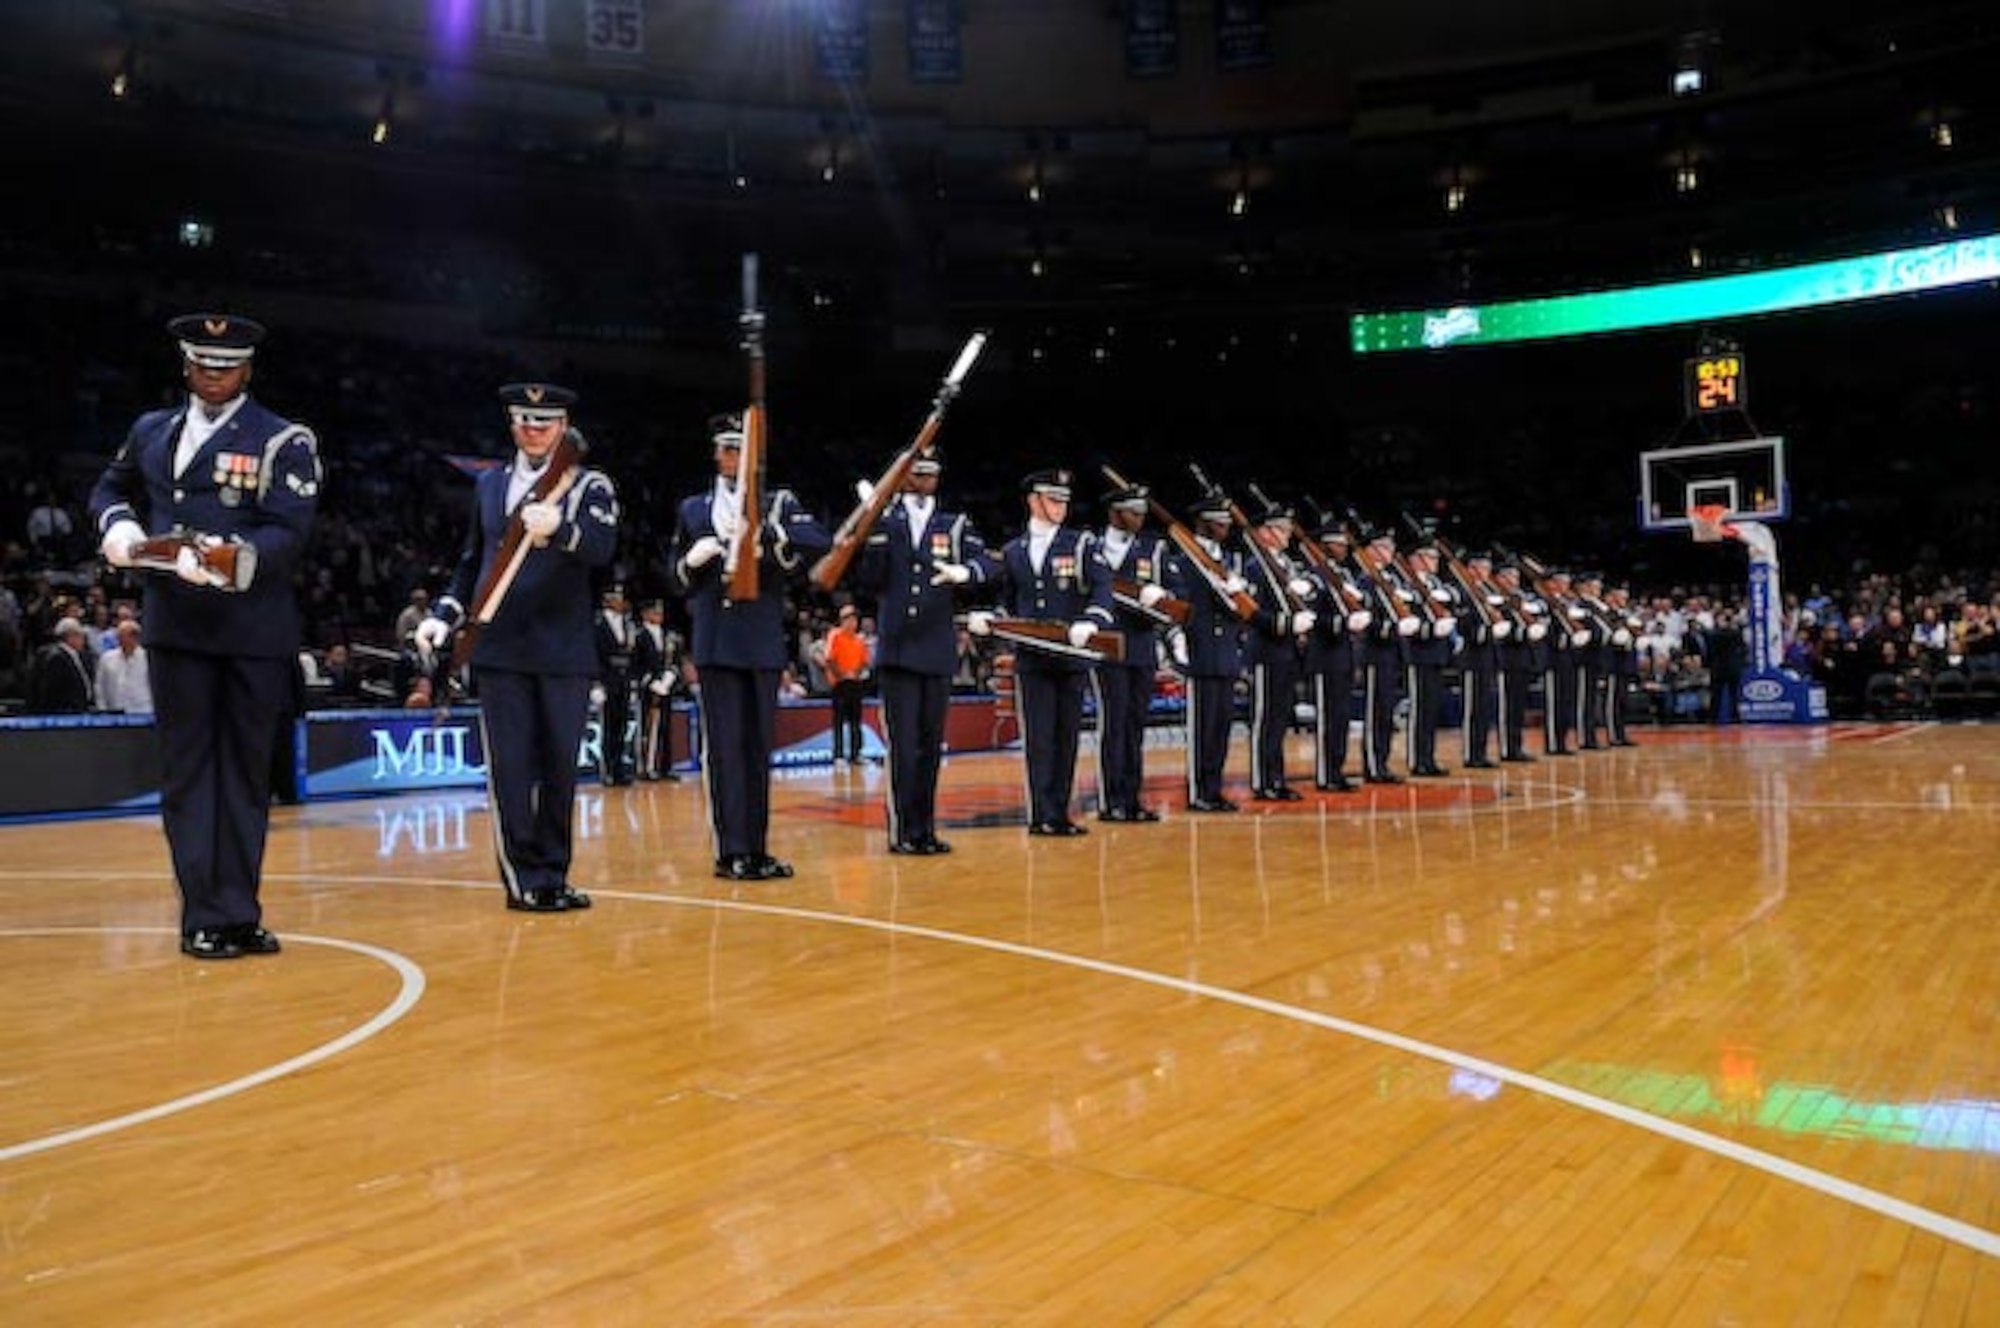 The United States Air Force Honor Guard Drill Team performs their line sequence during the New York Knick’s halftime show on Military Appreciation Night at New York’s Madison Square Garden Nov. 11.  The Drill Team is the traveling component of the U.S. Air Force Honor Guard and tours worldwide representing all Airmen while showcasing Air Force precision and professionalism. (U.S. Air Force photo by Senior Airman Marleah Miller)